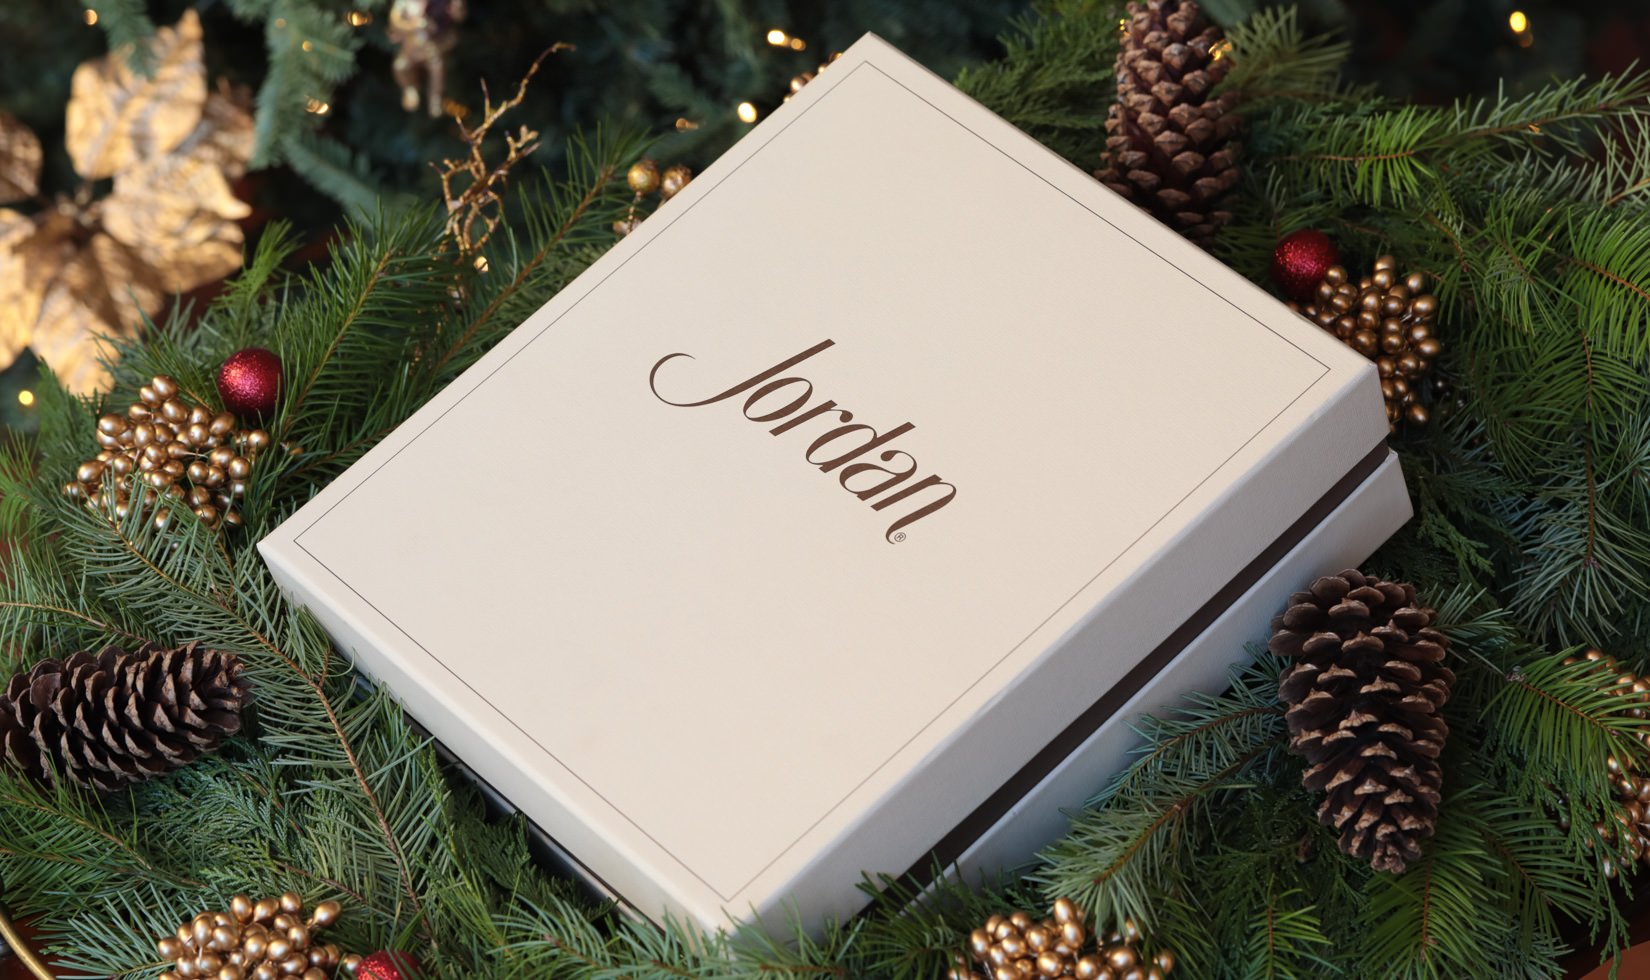 Jordan Winery gift box with festive holiday background